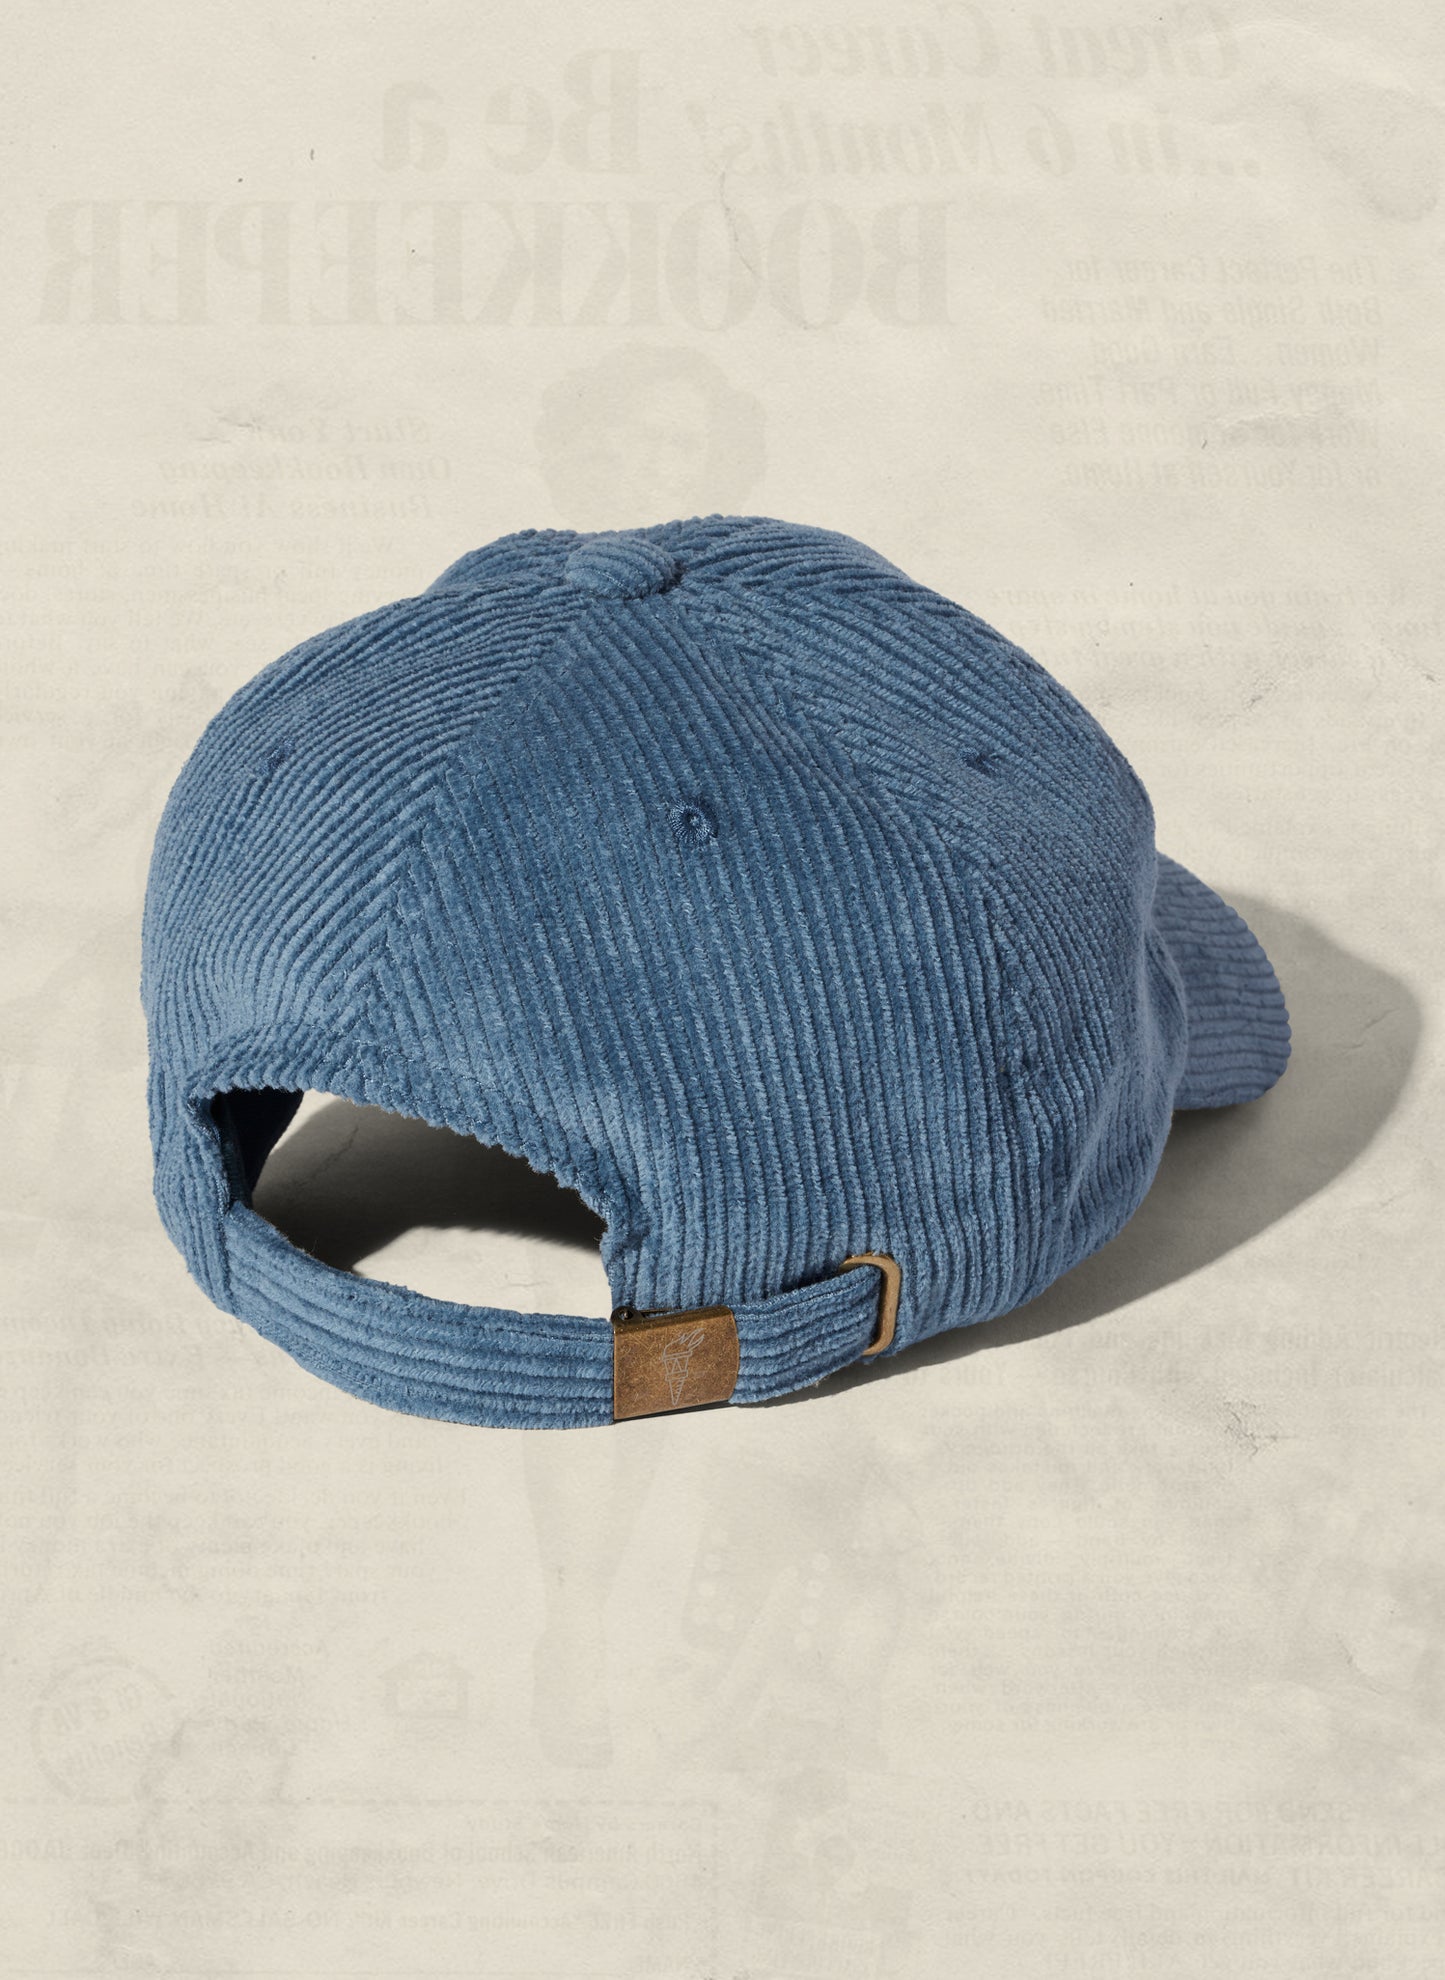 Soft Unstructured Corduroy Dad Hat in Vintage Unique Earthy Colors by Weld Mfg